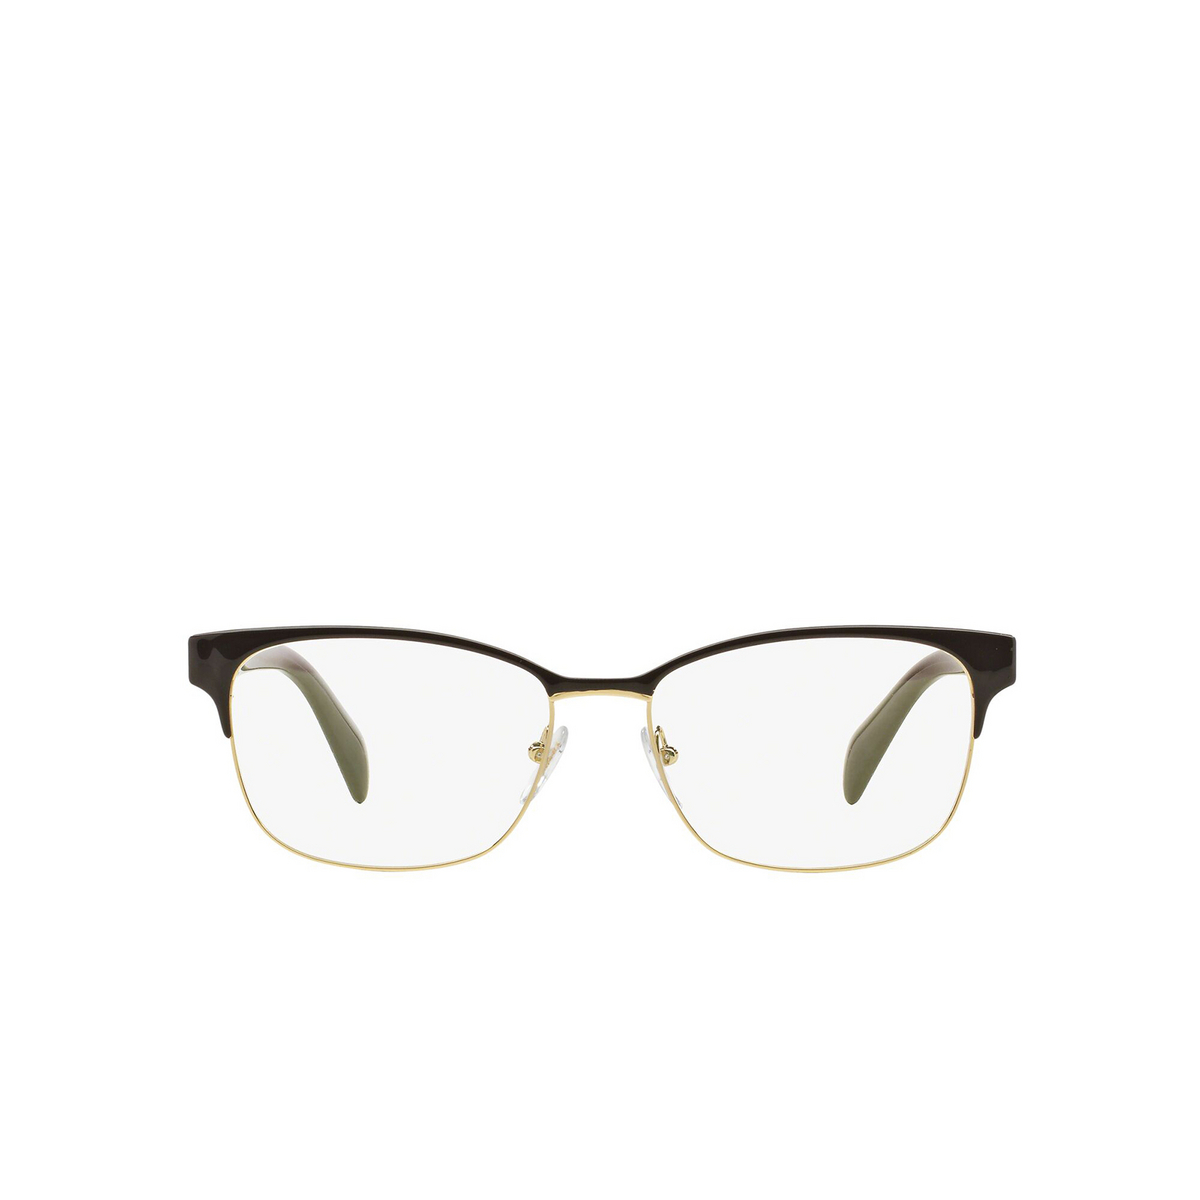 Prada® Rectangle Eyeglasses: Conceptual PR 65RV color Brown On Pale Gold DHO1O1 - front view.